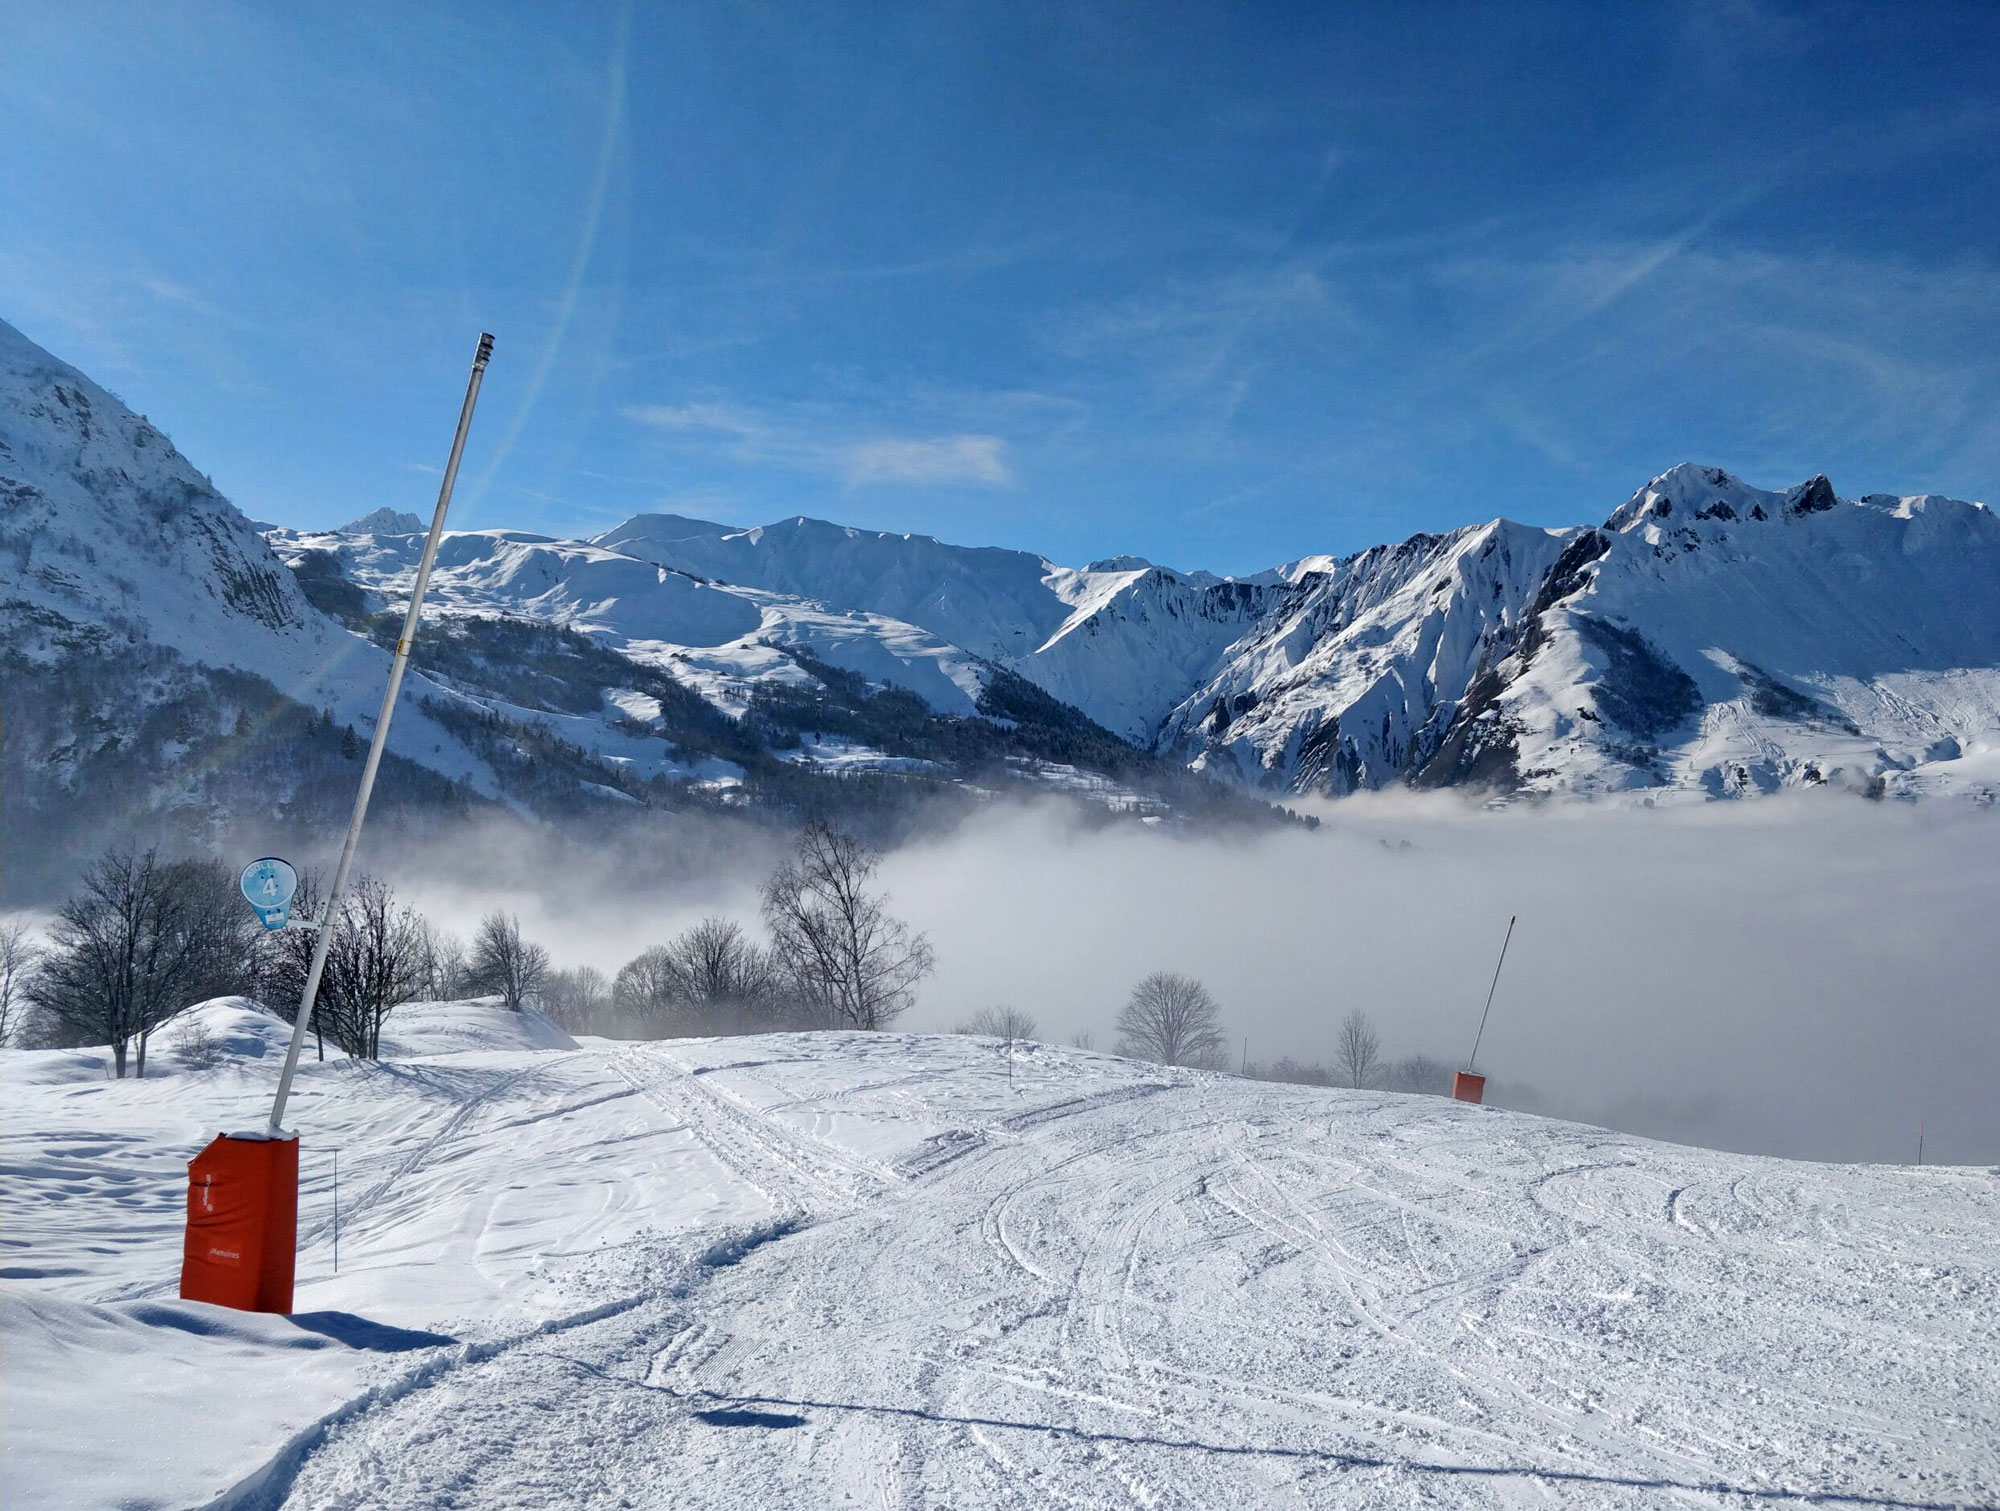 snow canons provide quality snow for some of the best skiing in france